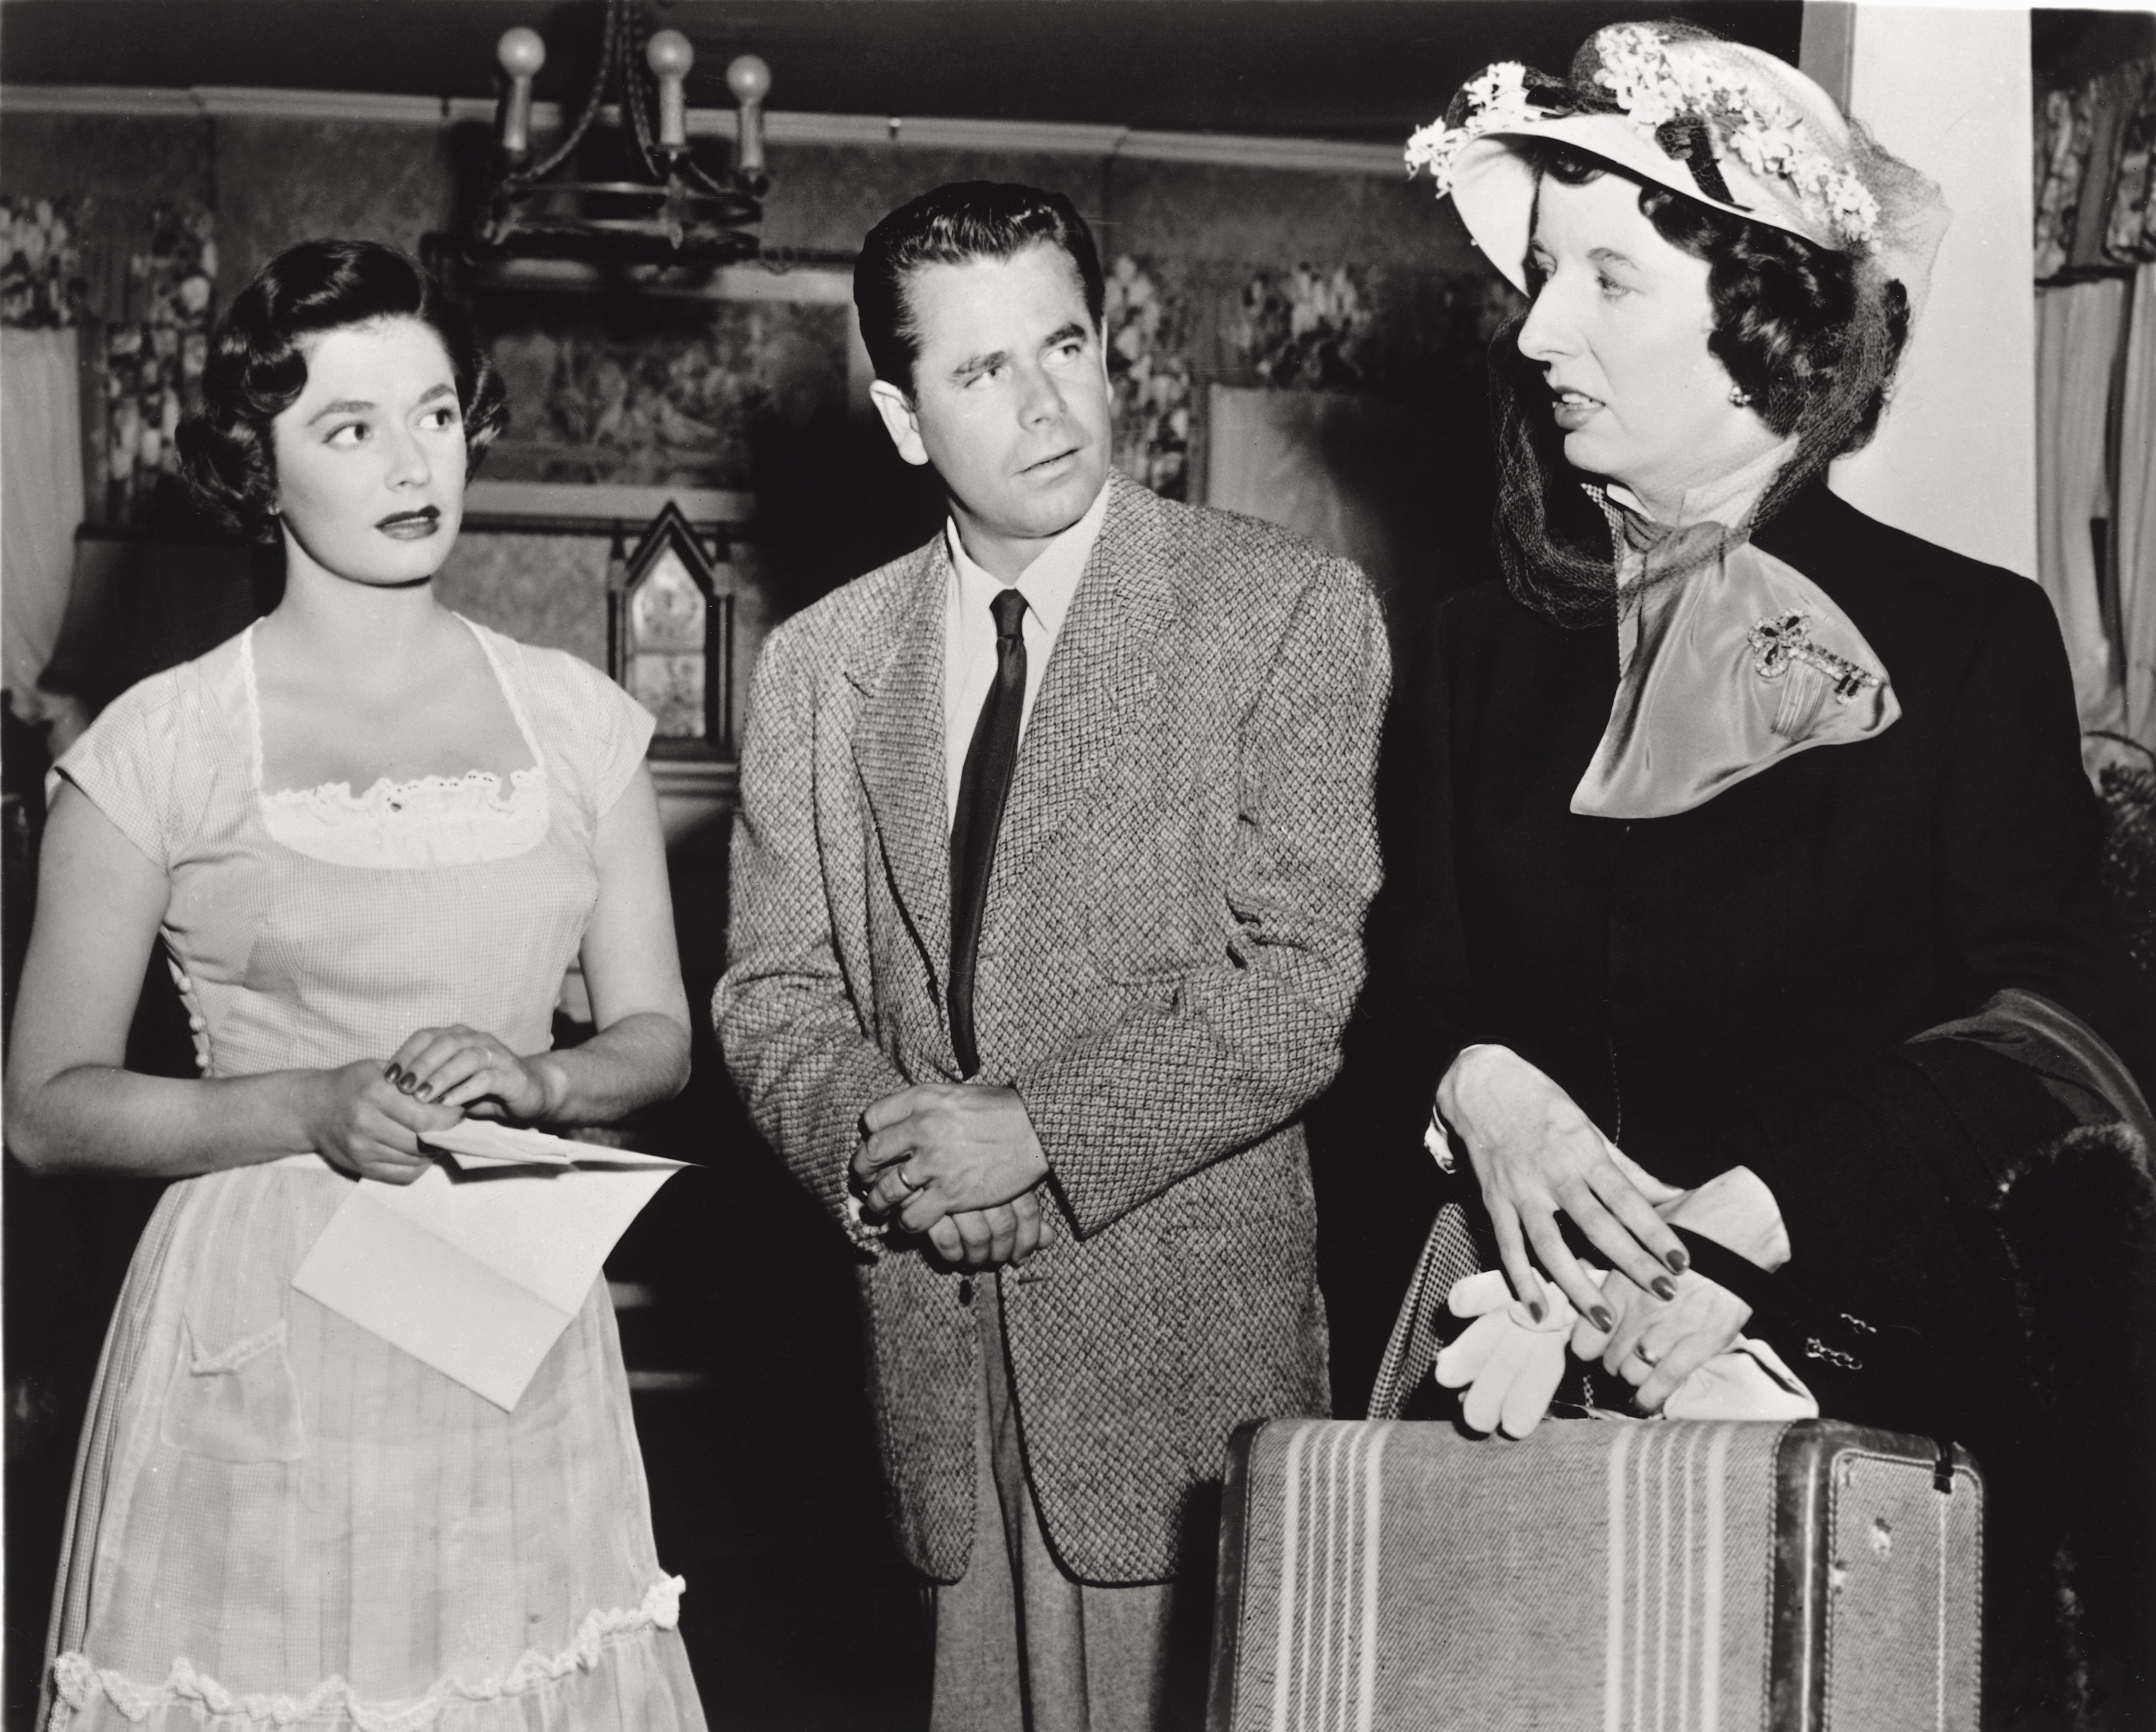 Actors Ruth Roman, Glenn Ford and Mary Wickes in 'Young Man with Ideas'. Ruth Roman, as Julie Webster, and Glenn Ford, as Maxwell Webster, interject with Mary Wickes, as Mrs. Jasper Gilpin. 1952. | Source: Getty Images